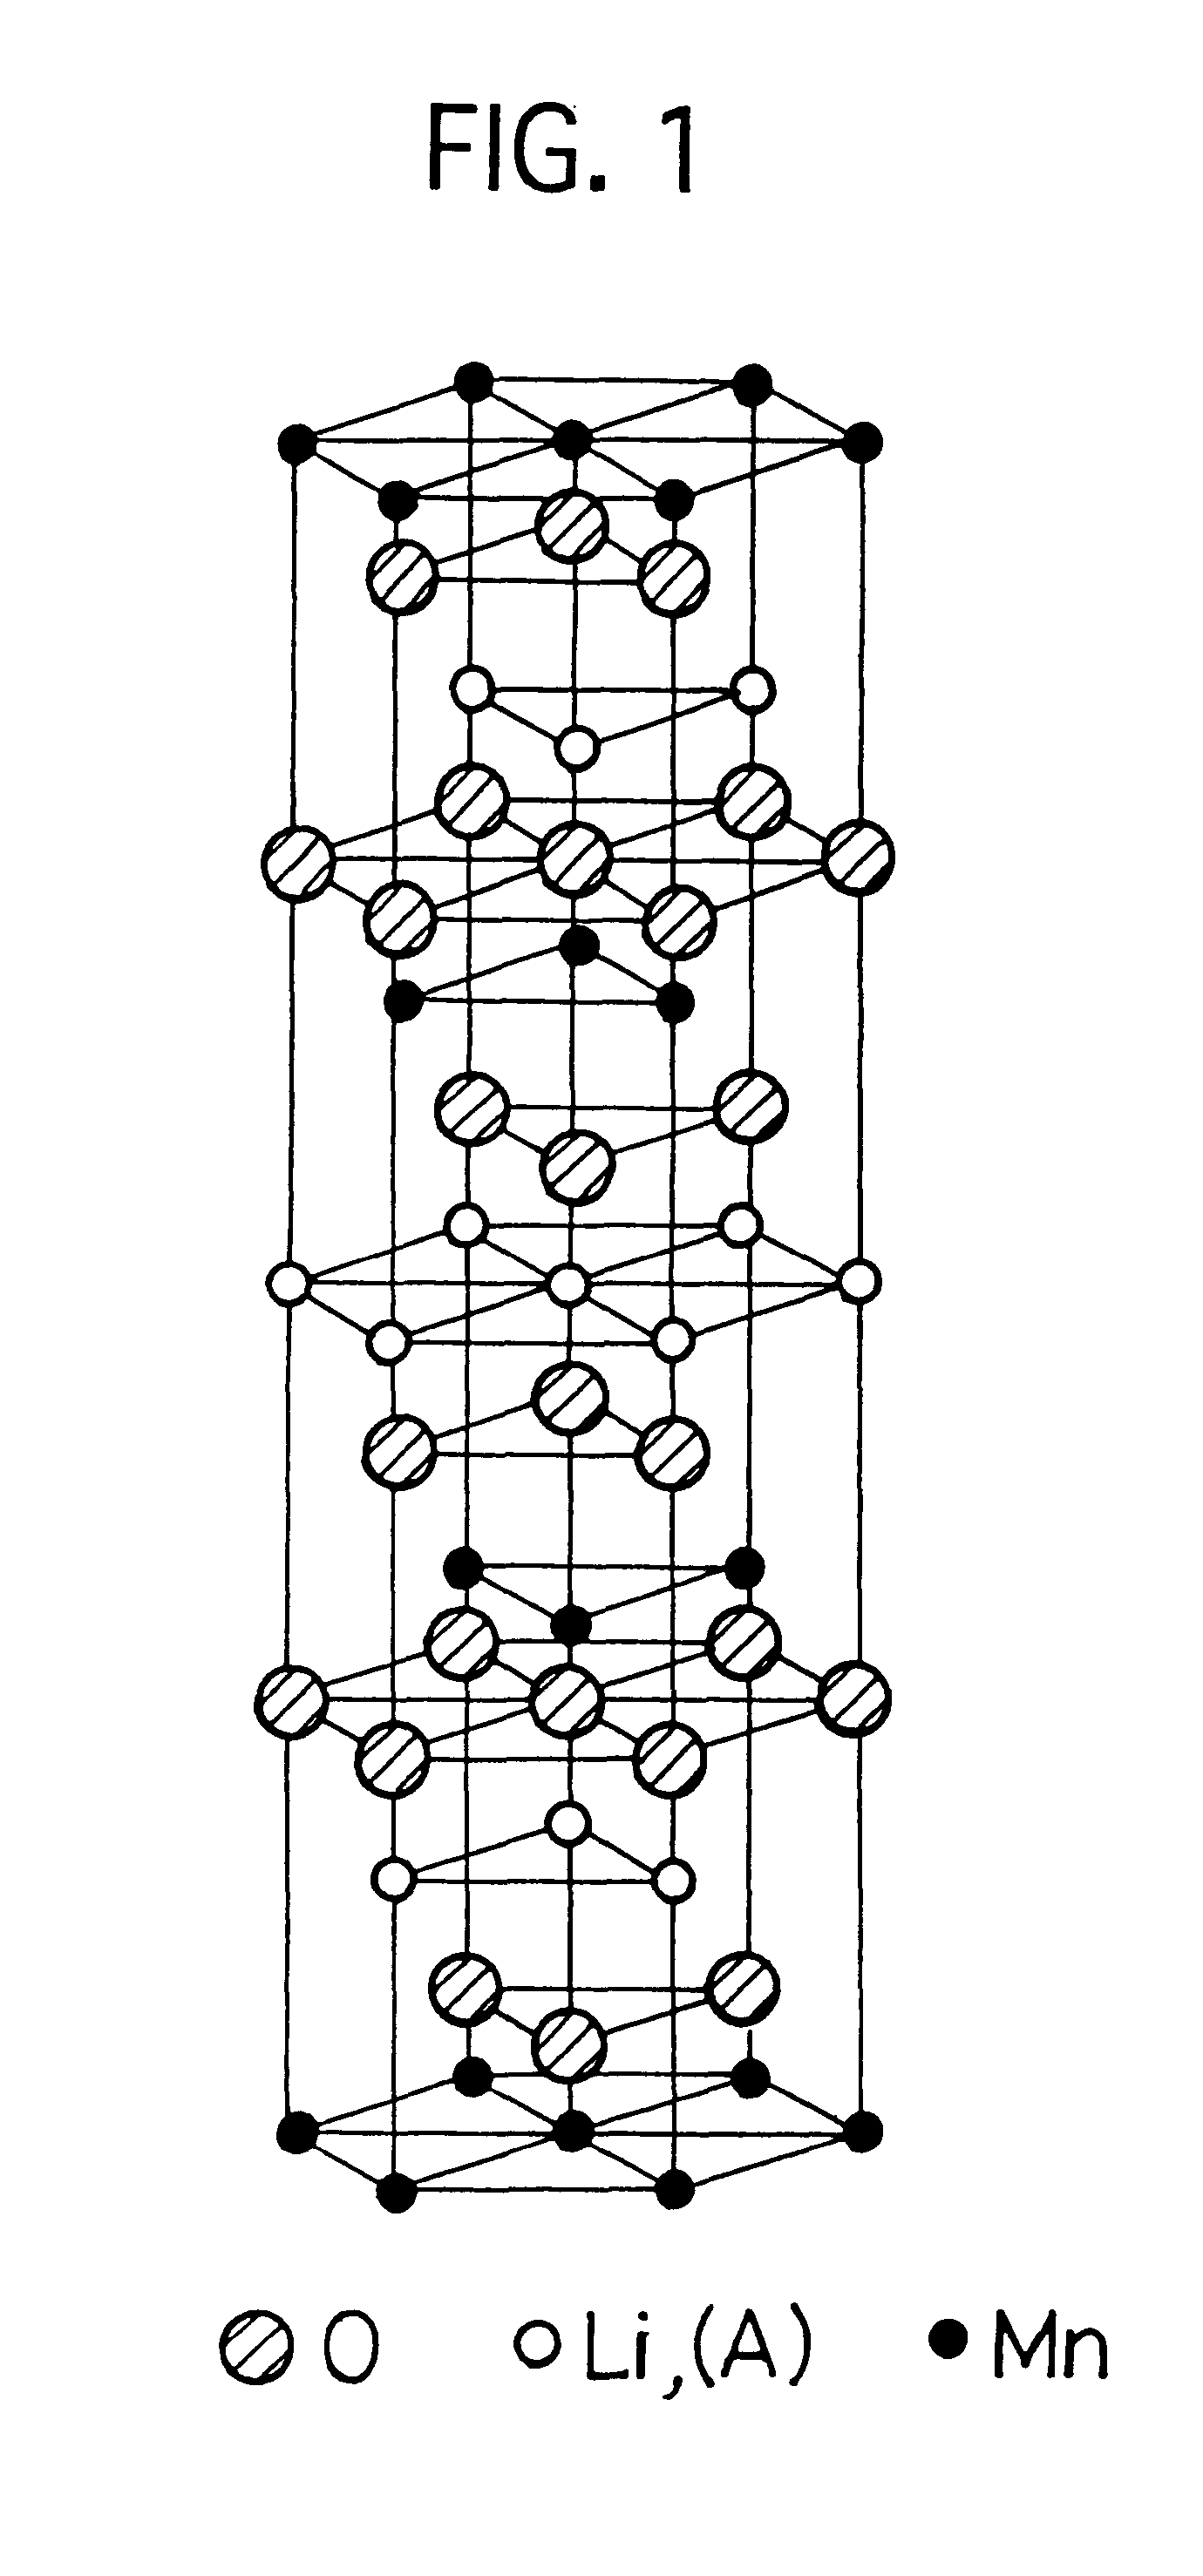 Lithium manganese composite oxide for lithium secondary battery cathode active material, manufacturing method thereof, and lithium secondary battery using the composite oxide as cathode active material